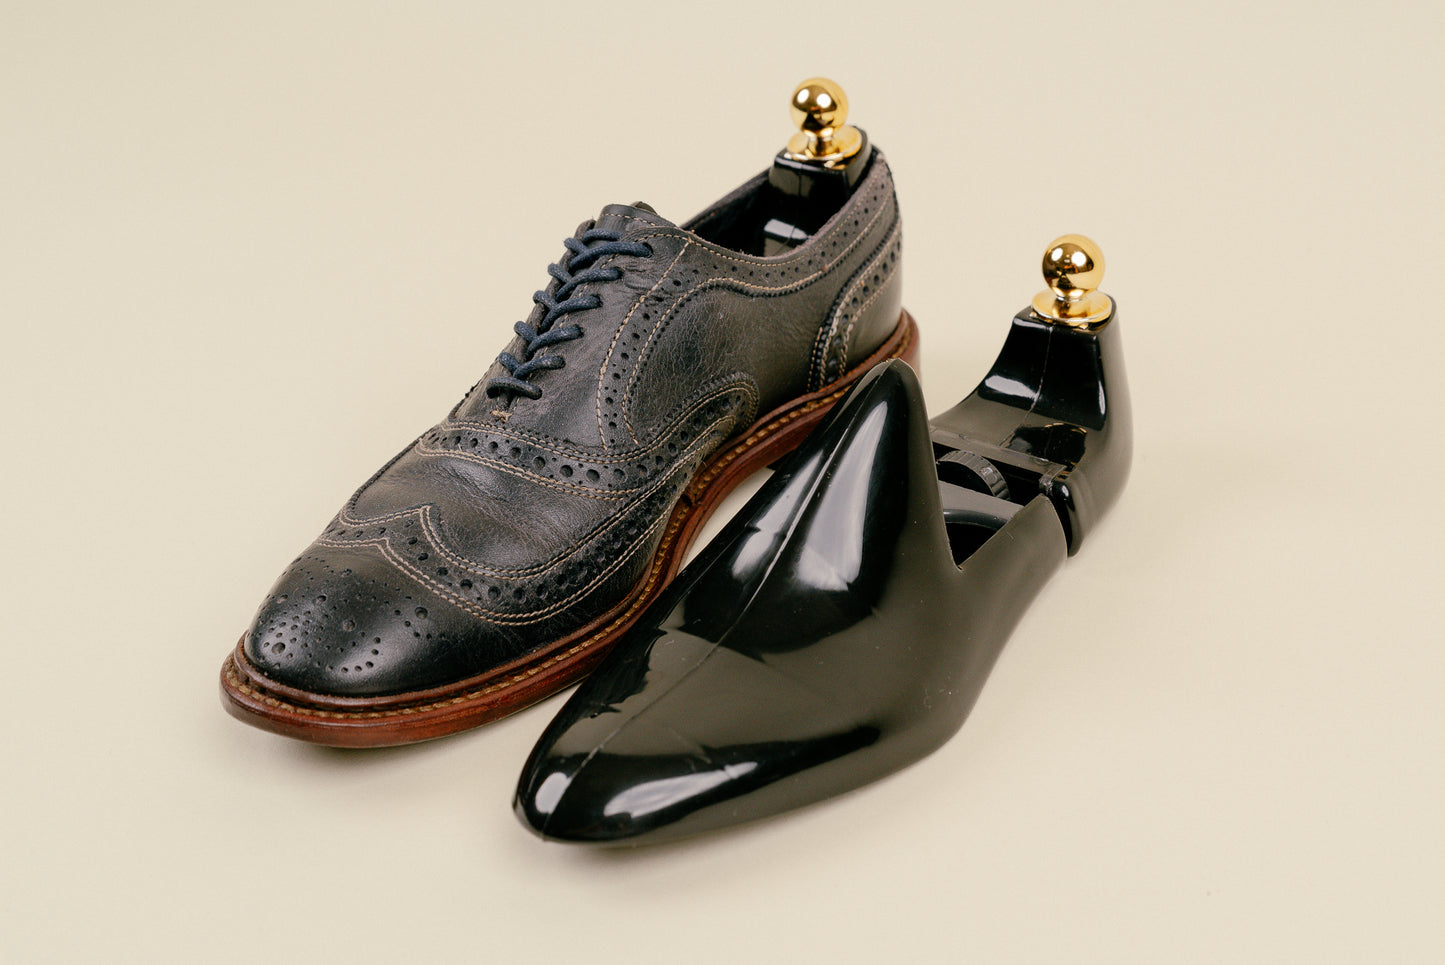 Brillaré black plastic adjustable shoe trees made in italy 7 inserted into a pair of allen edmonds oxfords 